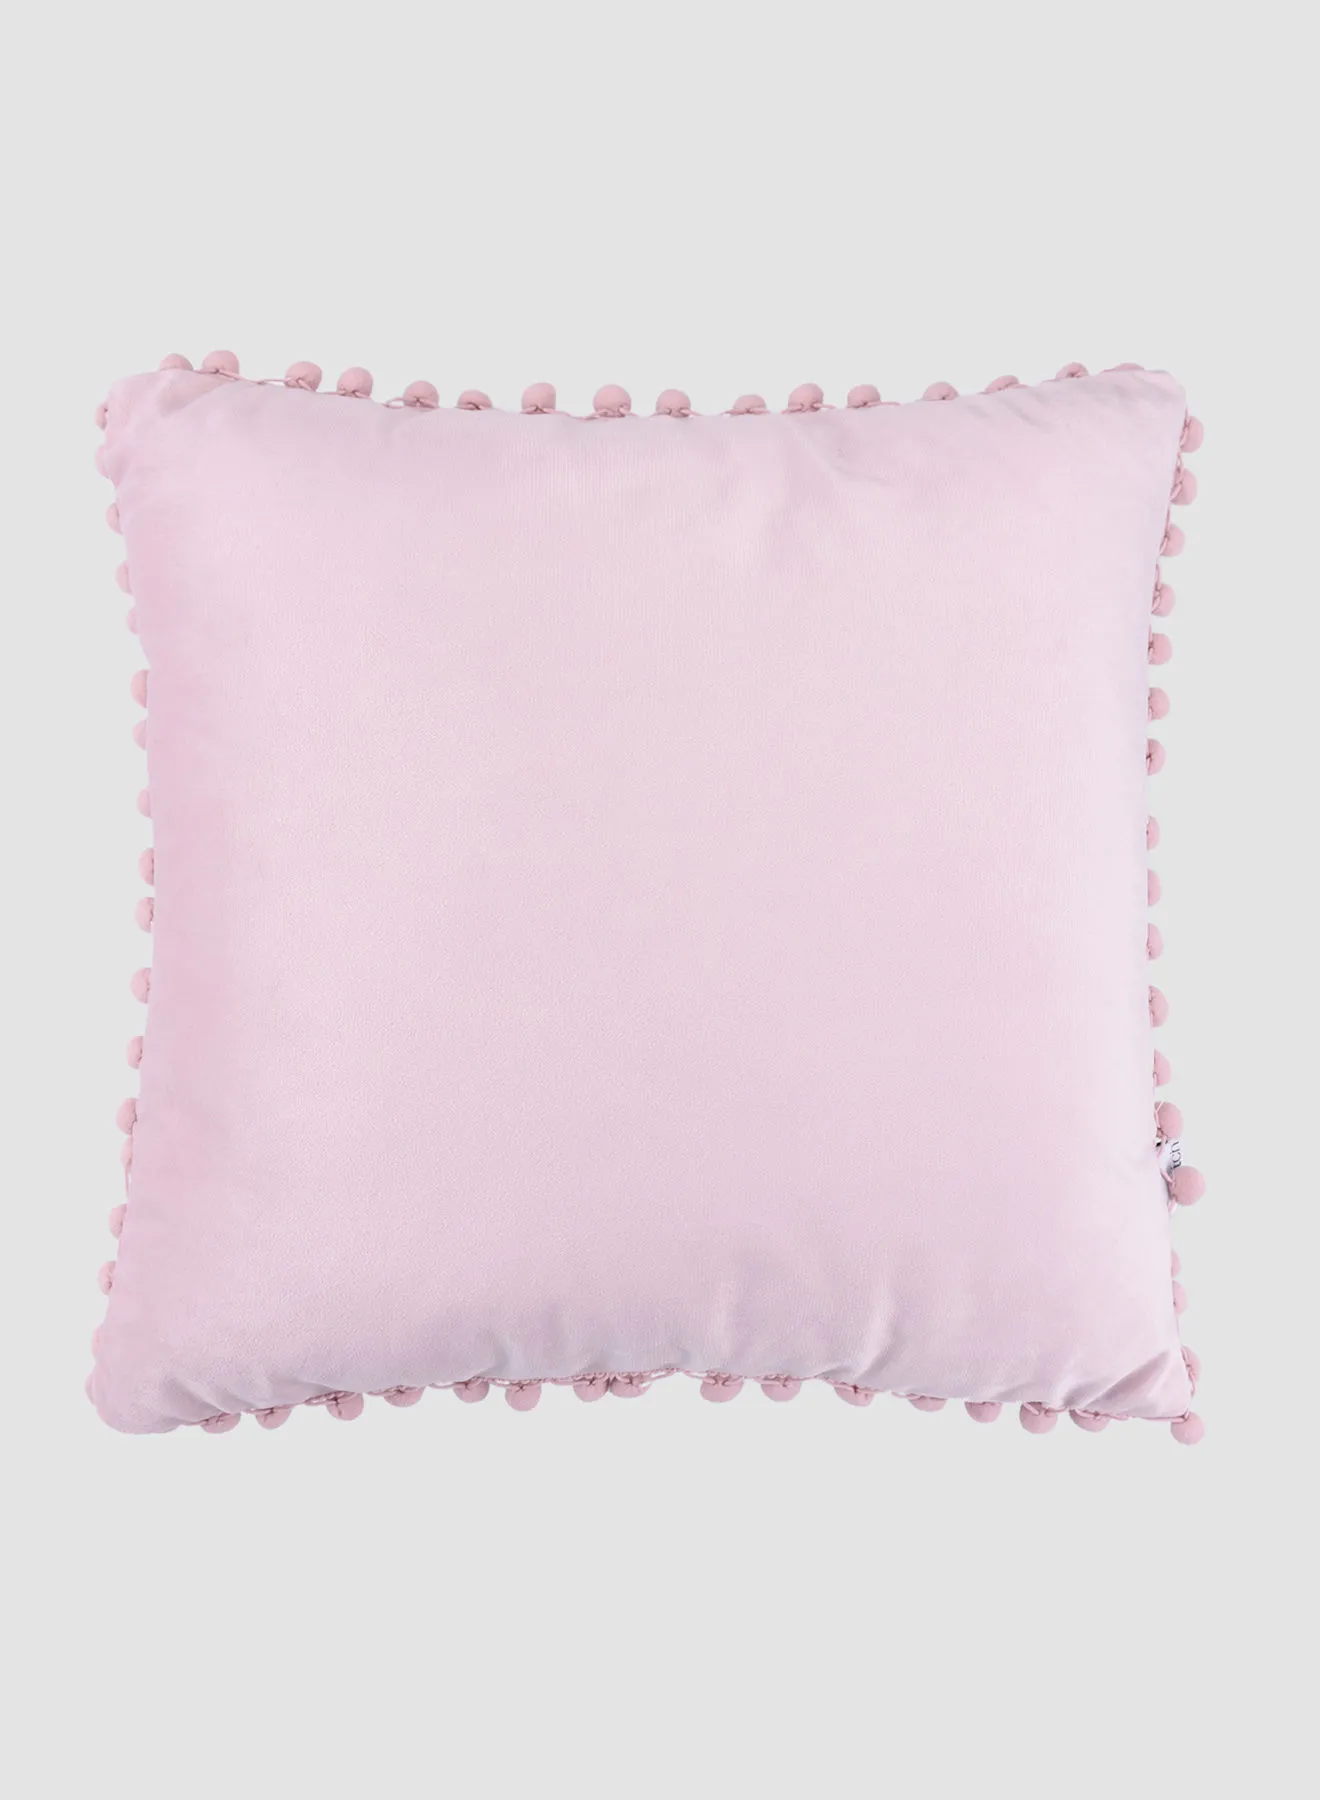 Switch Velvet Cushion  with Pom-poms, Unique Luxury Quality Decor Items for the Perfect Stylish Home Pink 45 x 45cm